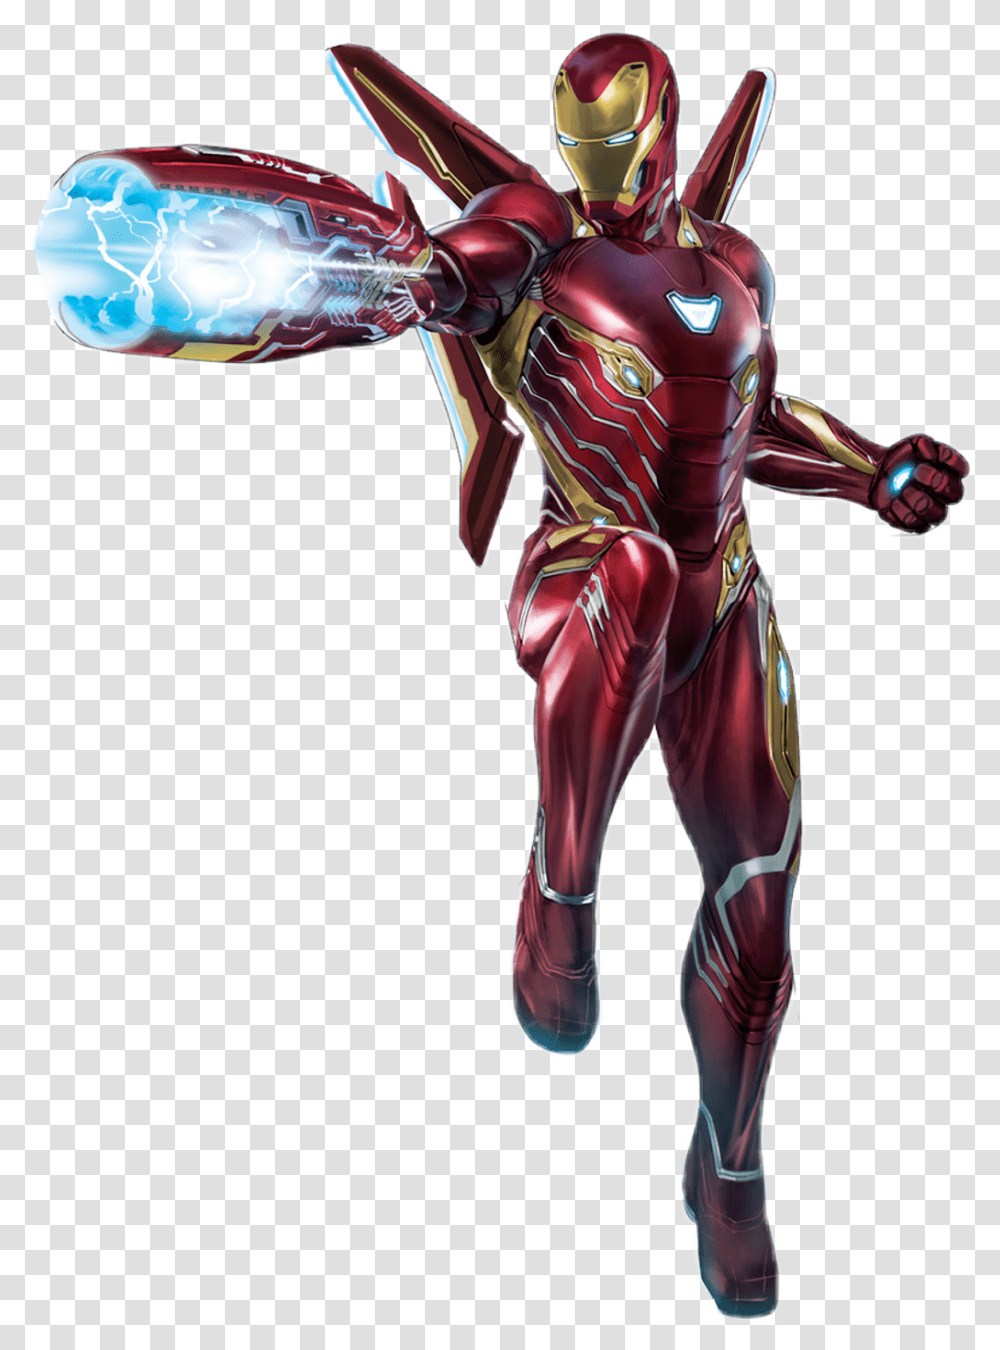 Iron New Suit Infinity War Download Iron Man Infinity War, Toy, Costume Transparent Png